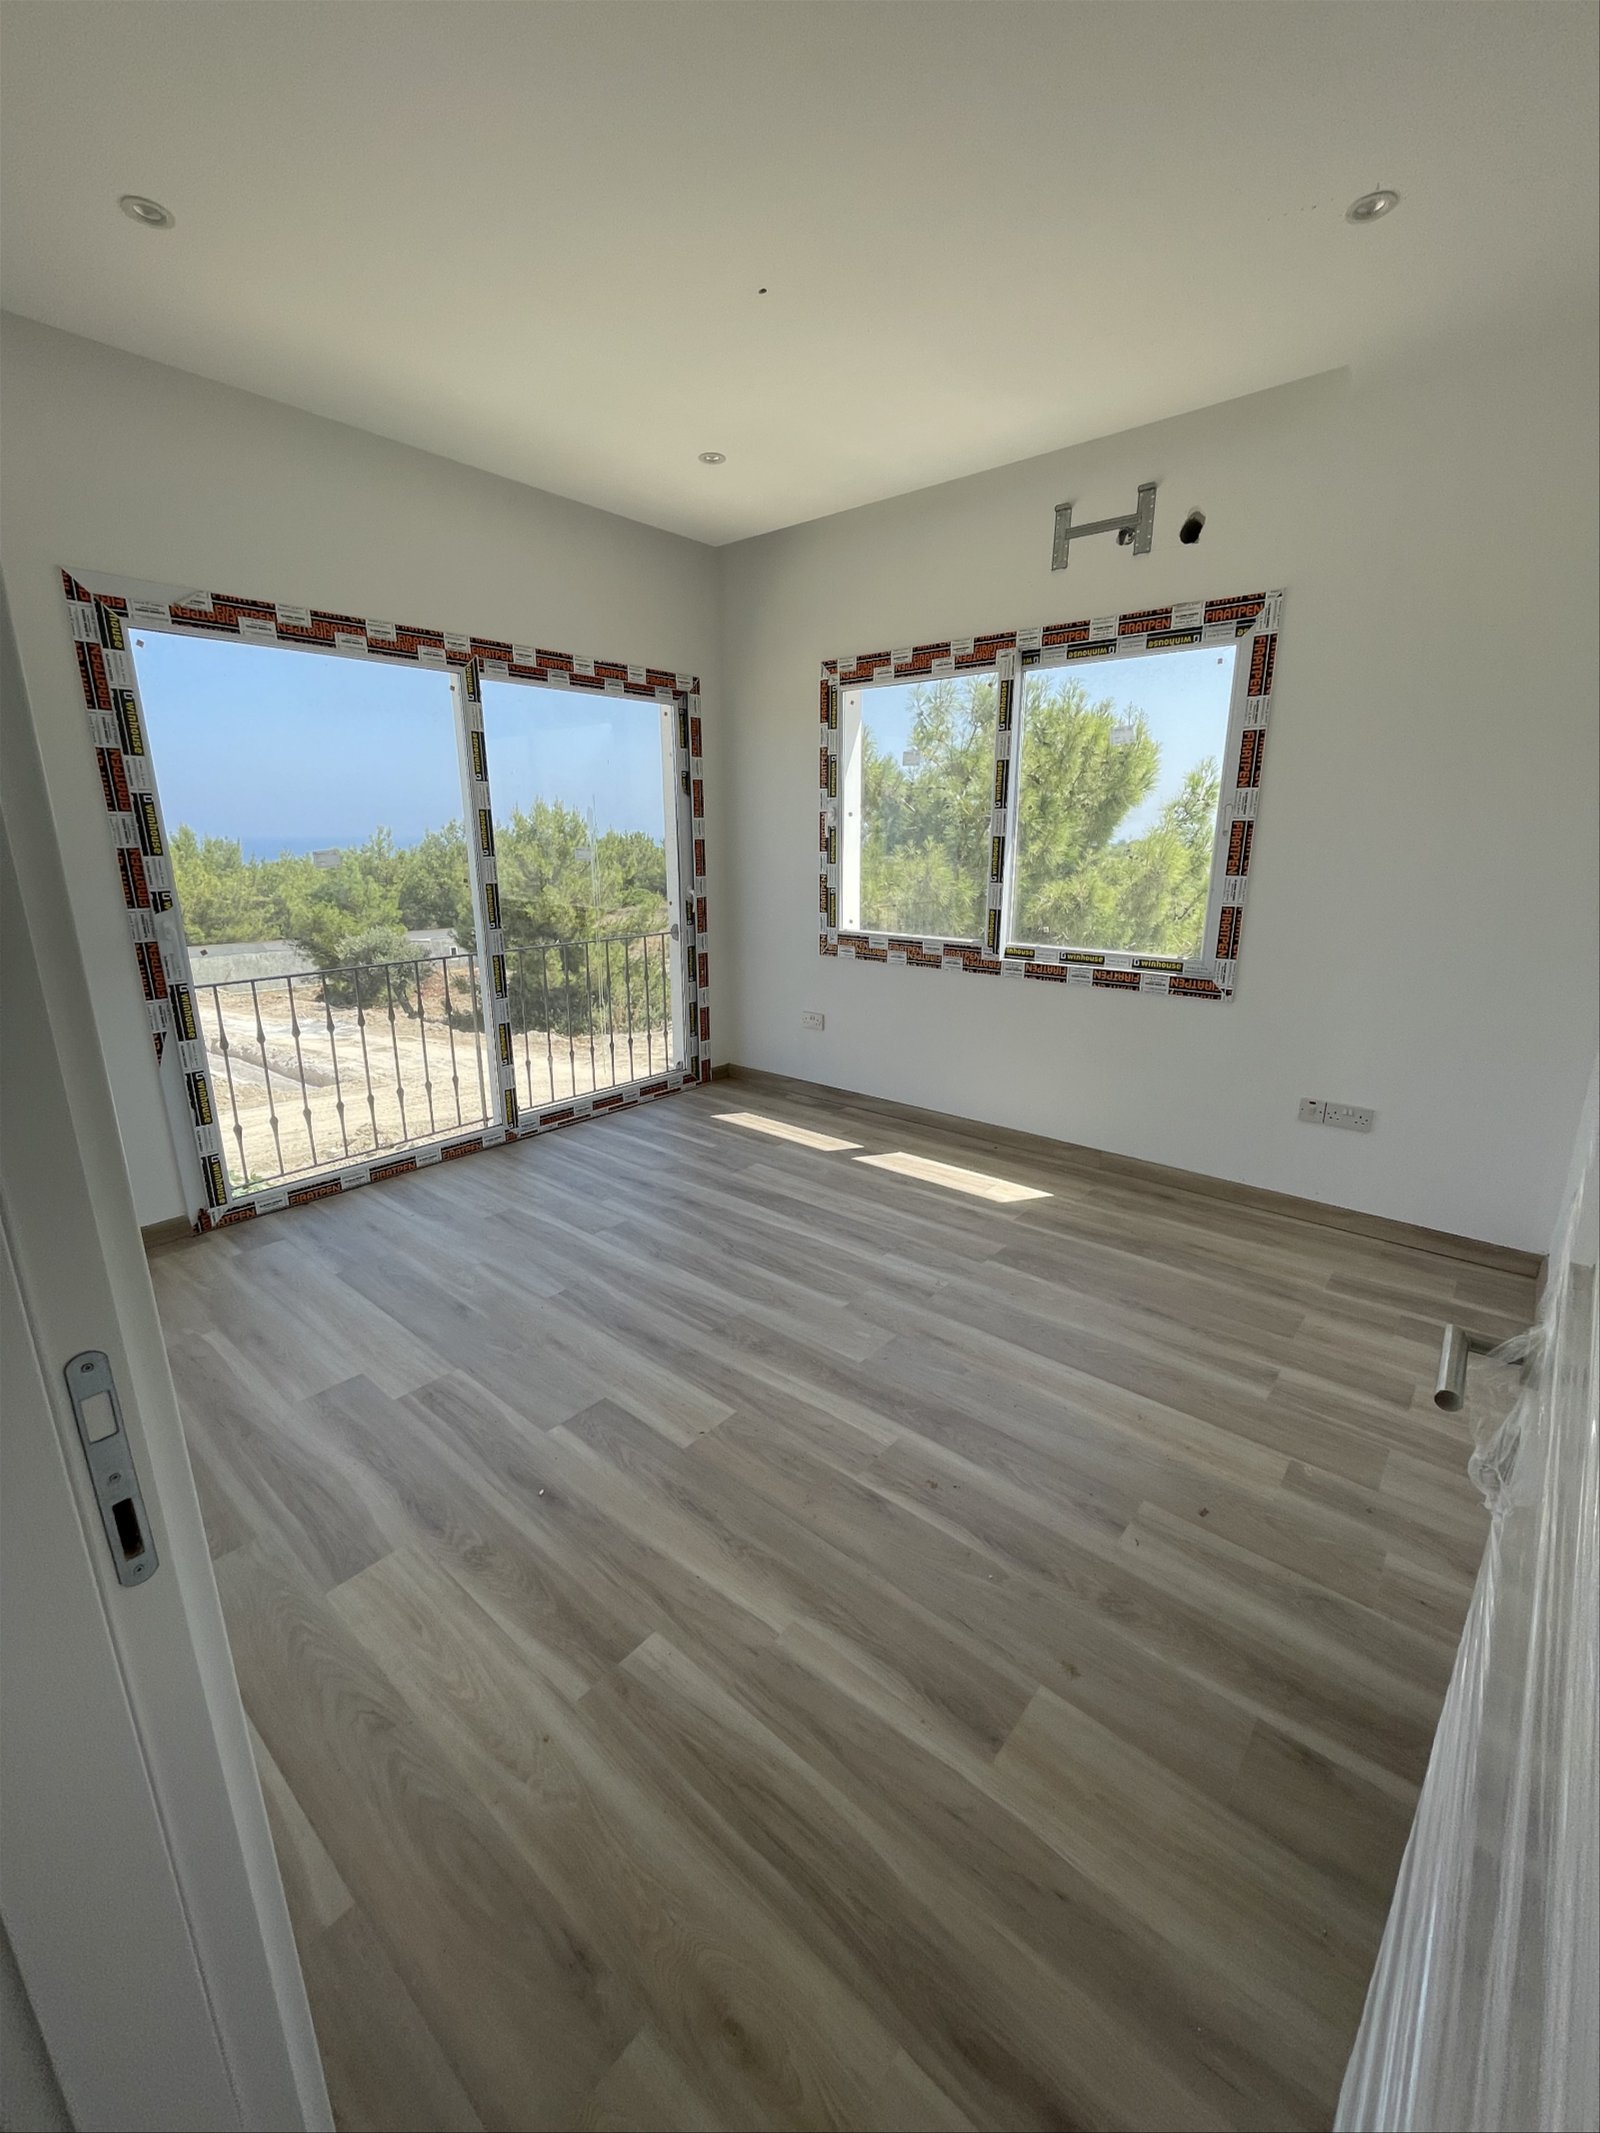 For Sale 3+1 New Villa in Catalkoy-c5eea1a9-c095-4d32-ab35-348c550642c2